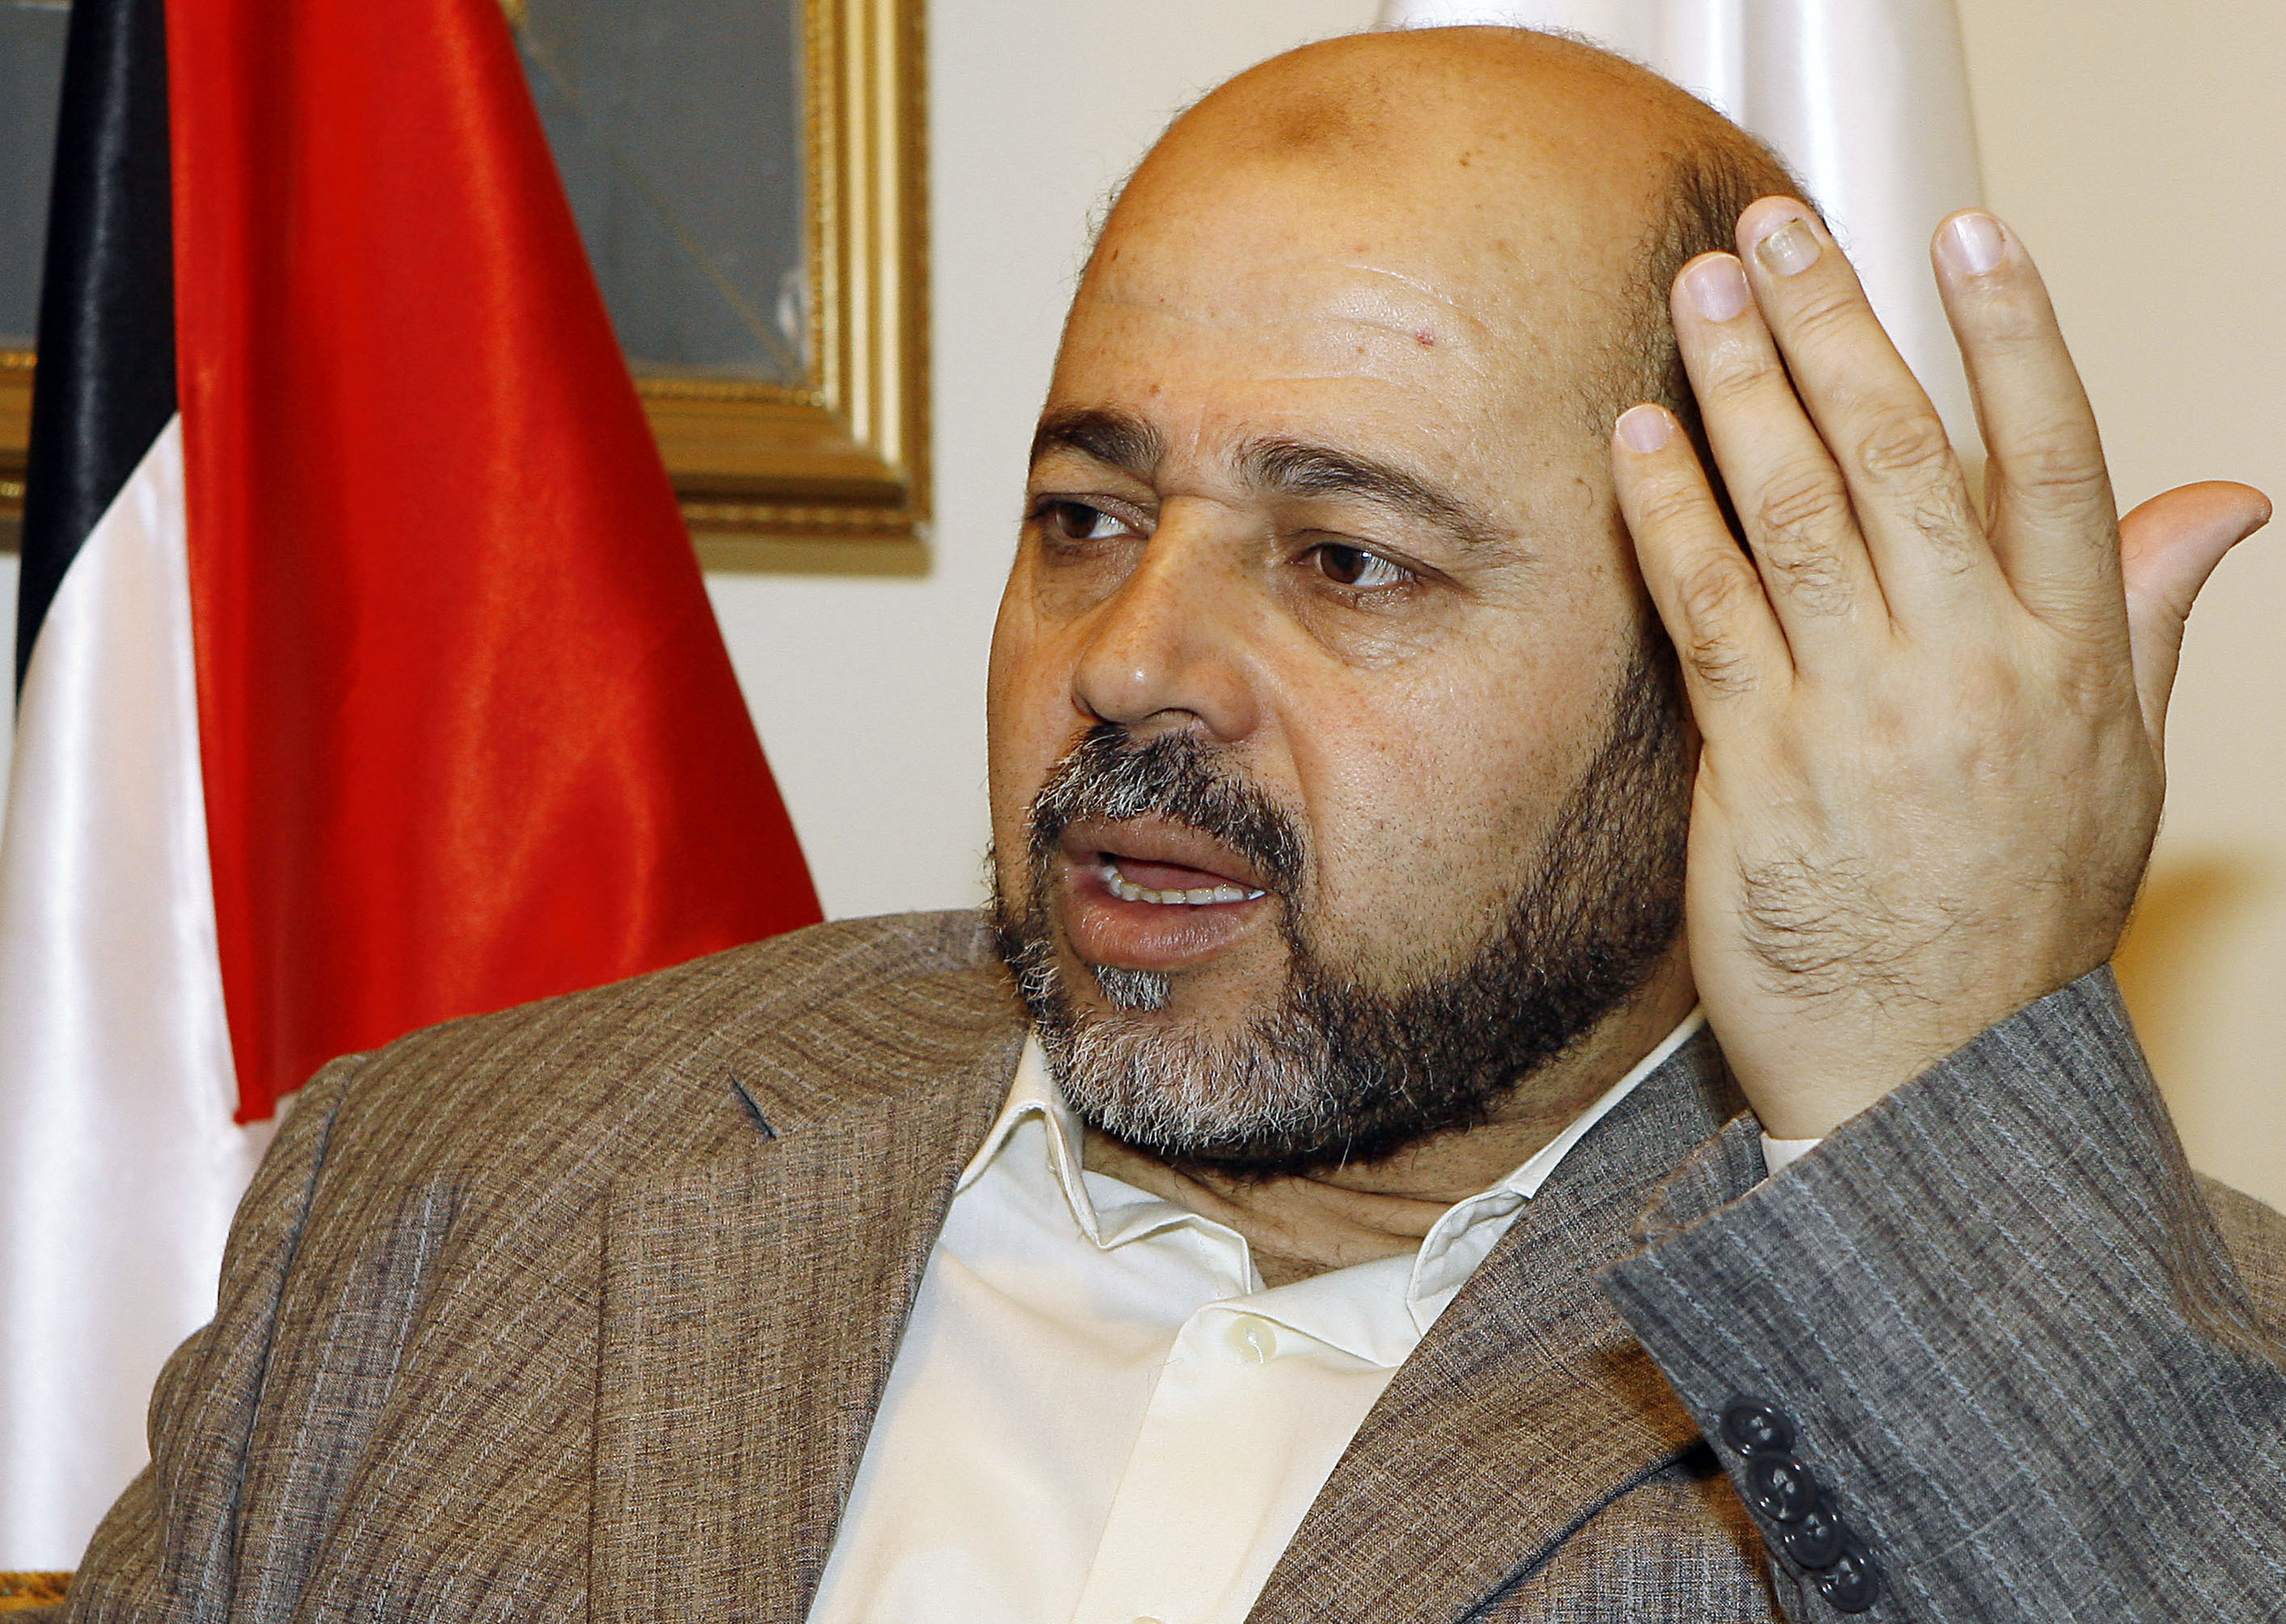 Deputy Hamas leader Moussa Abu Marzouk speaks during an interview with The Associated Press in Damascus, Syria, Saturday, Nov. 08, 2008. Abu Marzouk on Saturday announced that his group would boycott this weekend's Palestinian reconciliation talks with rival Fatah. Abu Marzouk told The Associated Press that Fatah had reneged on a pledge to release Hamas prisoners it holds ahead of the dialogue, prompting the boycott. He acknowledged that many issues had been settled but that the prisoners issue was too important to disregard. (AP Photo/Bassem Tellawi)